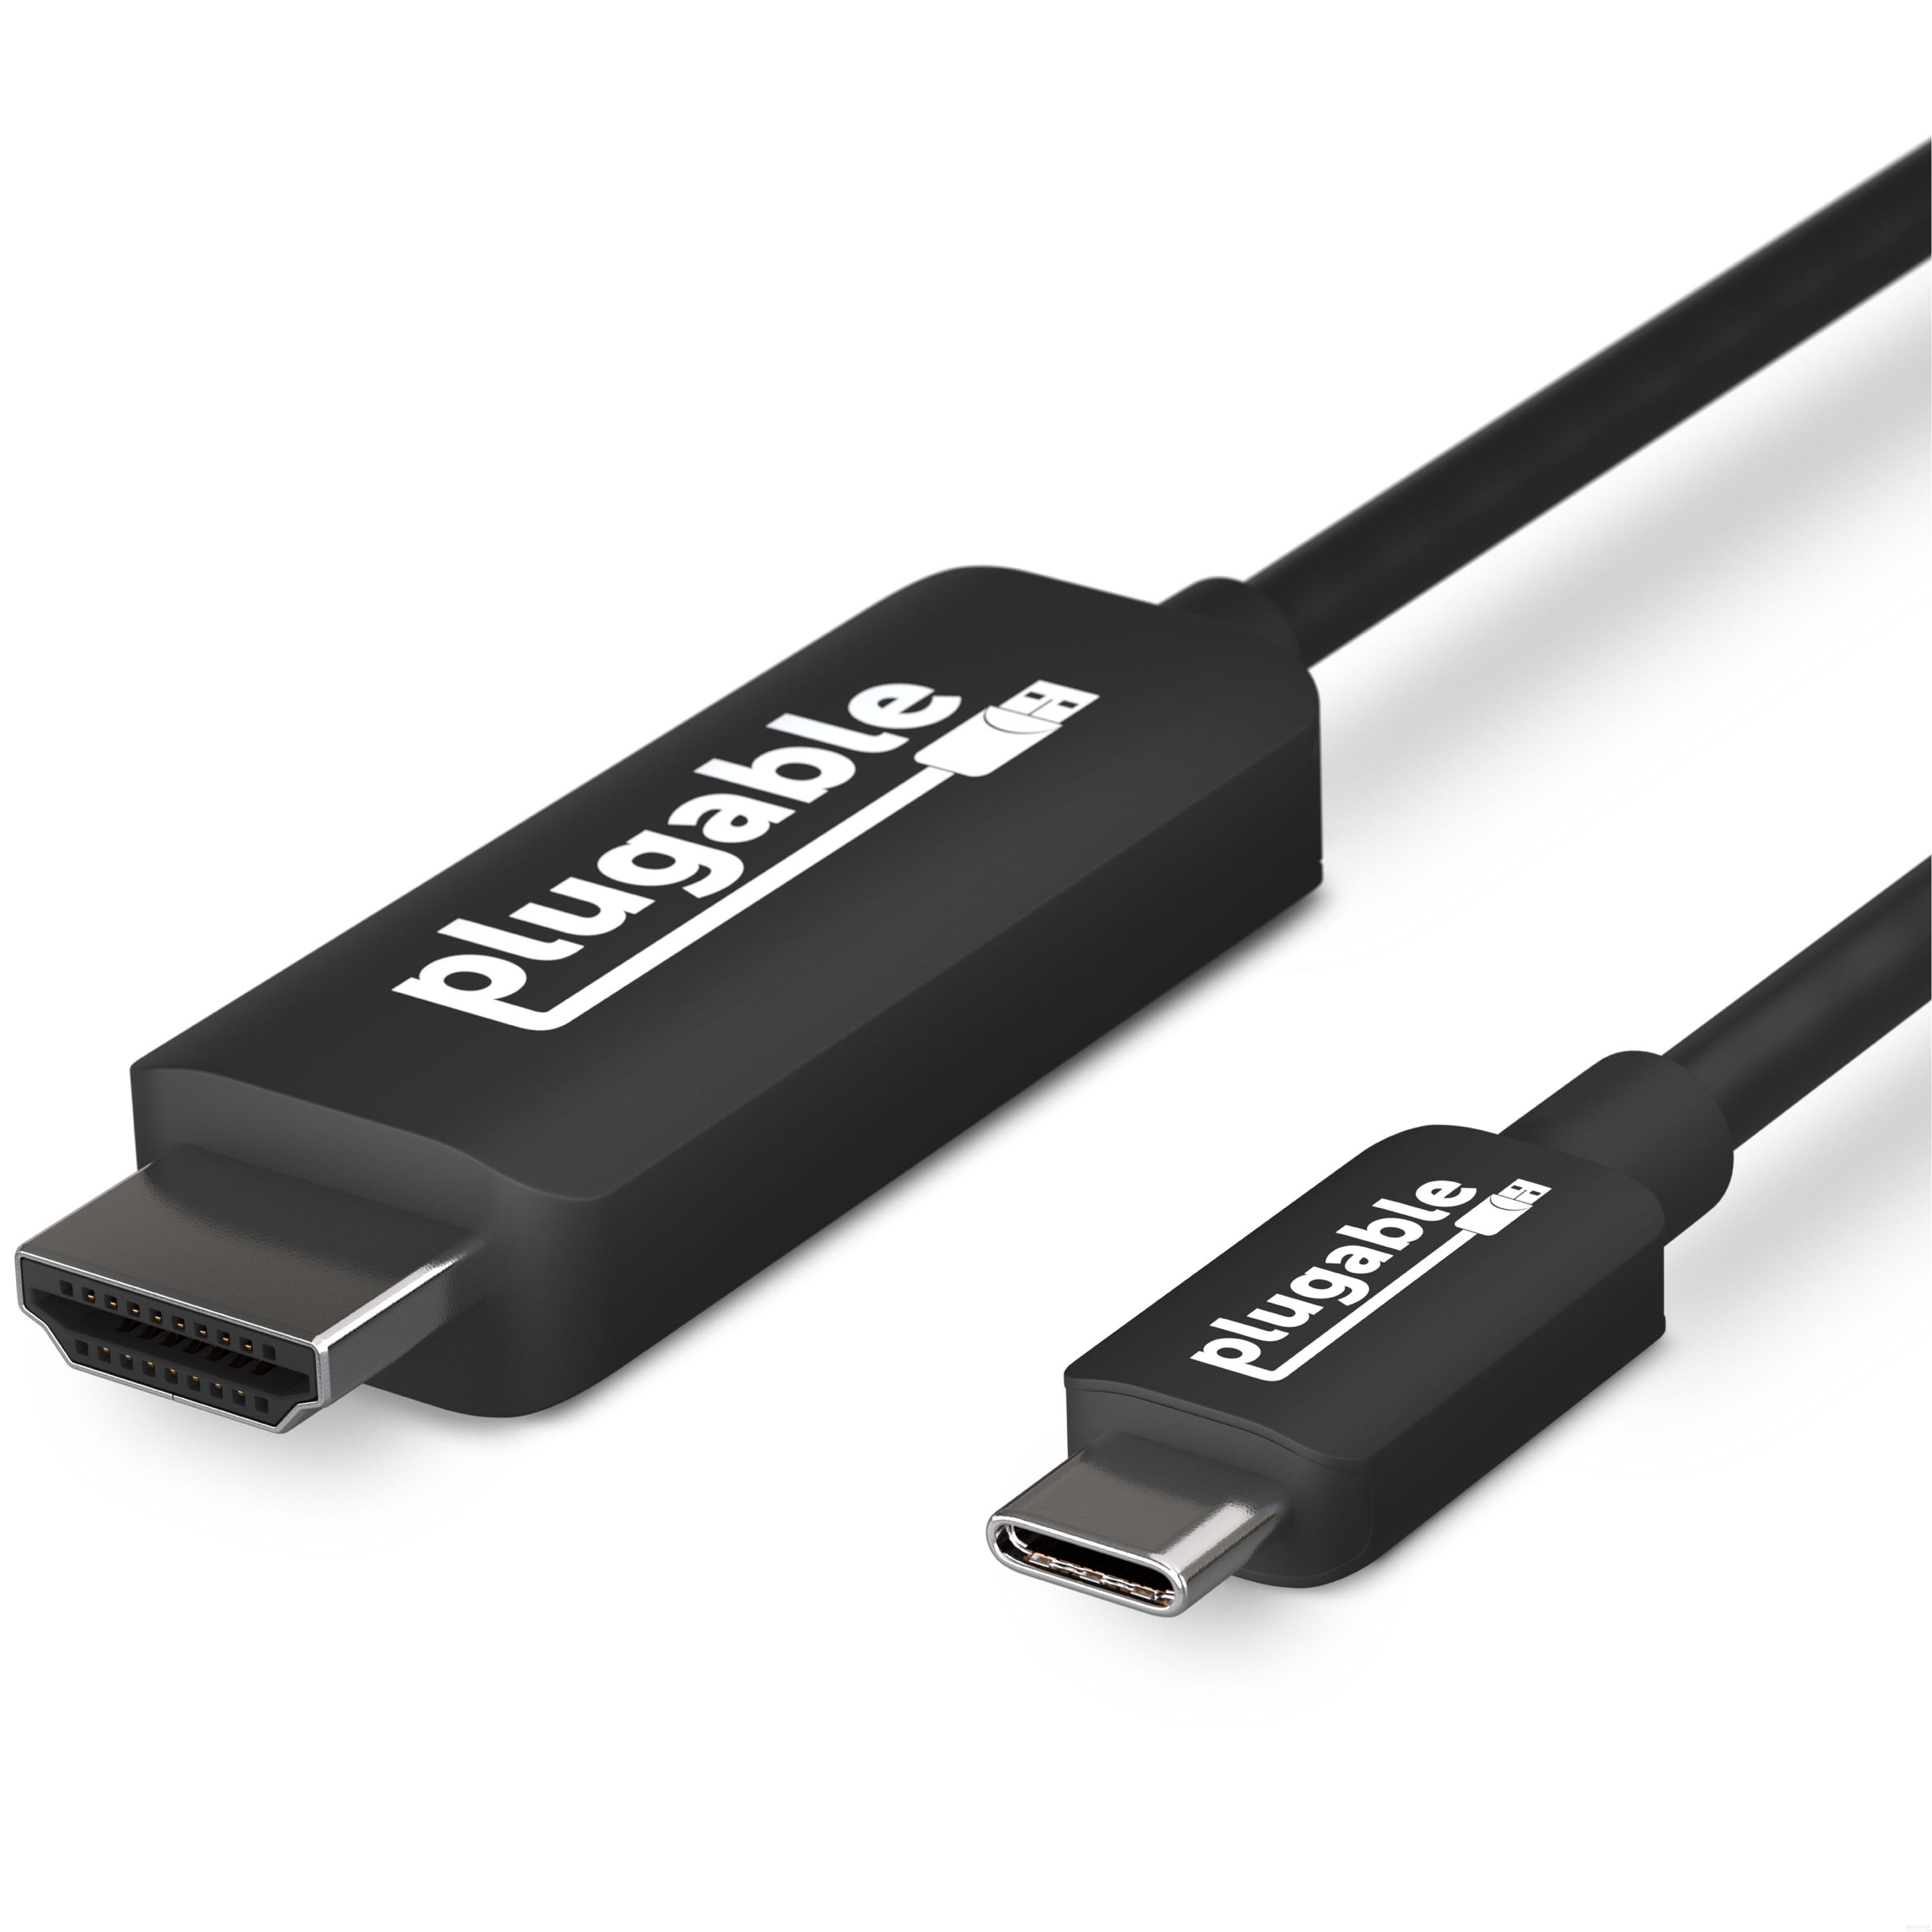 Plugable USB C to HDMI Cable 6ft - Connect USB-C, Thunderbolt 3, Thunderbolt 4 or USB4 Laptops to HDMI Displays up to 4K@60Hz - Compatible with Mac and Windows, HDMI 2.0, 1.8m - image 1 of 6